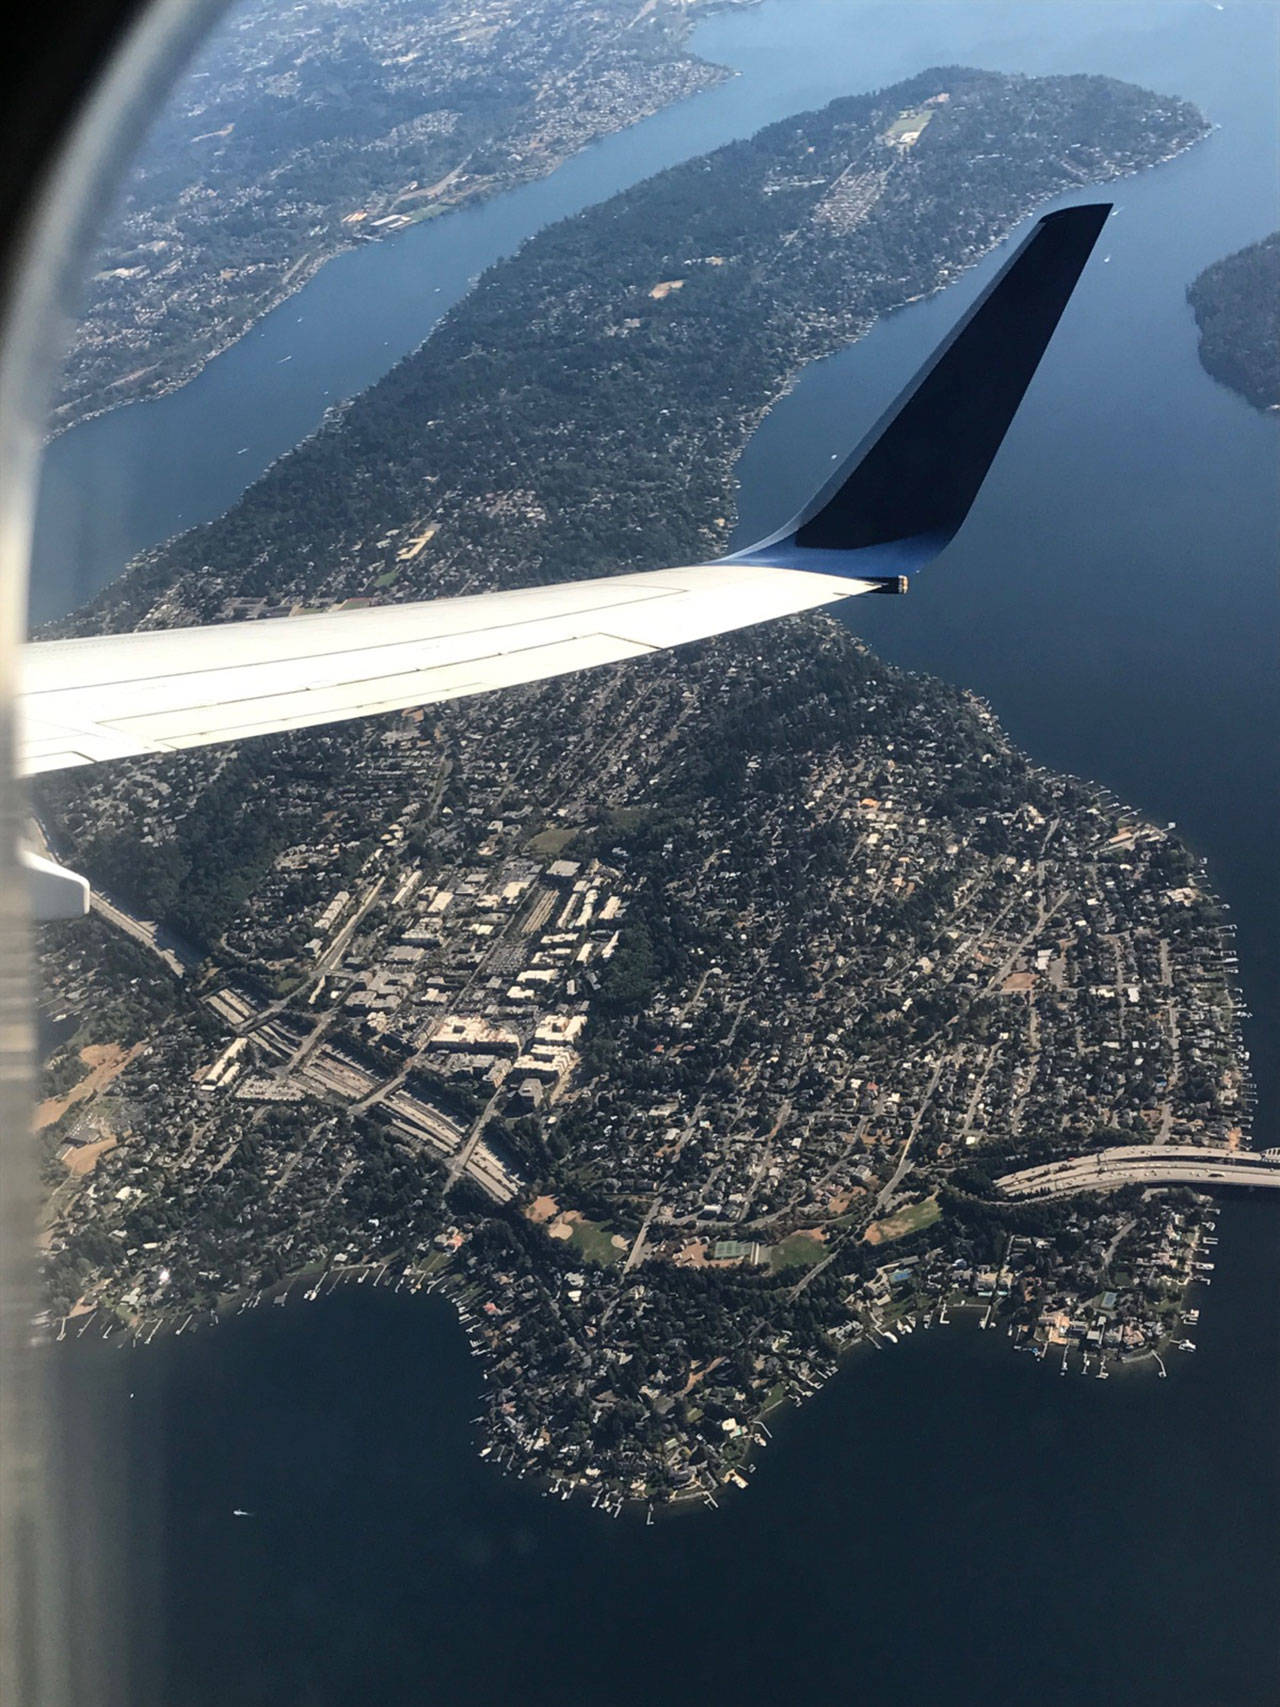 Mercer Island resident Sue Robinson recently took this picture over Mercer Island on a flight to Southern California. Submit your photos of amazing, people, places and things around the Island to editor@mi-reporter.com for the Reporter’s “Eye on MI” feature.